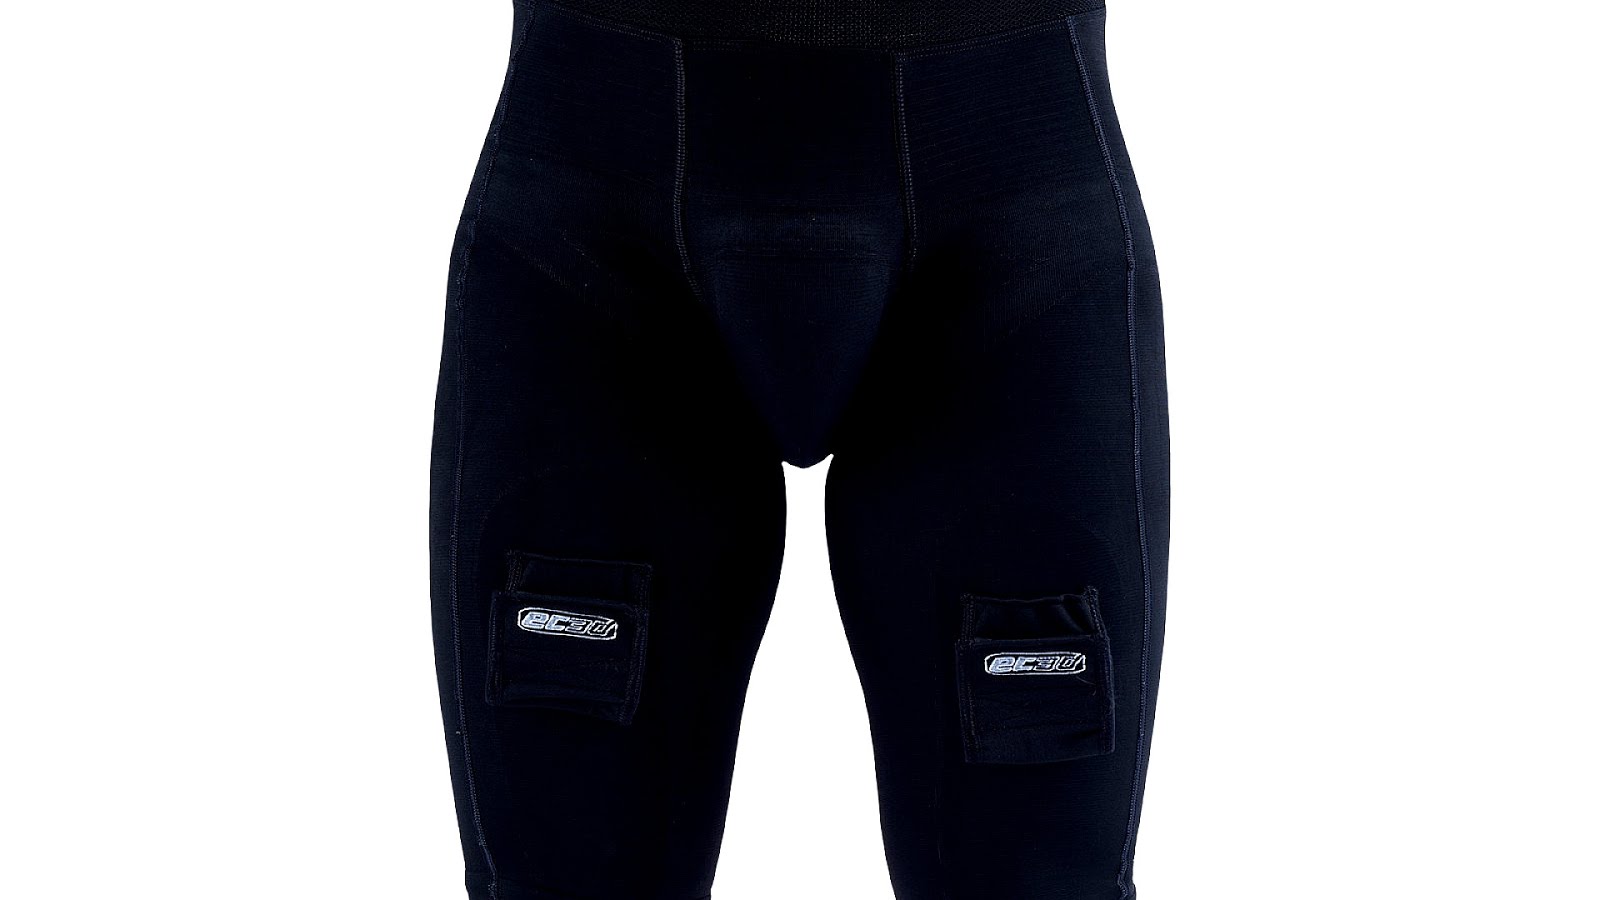 Compression Shorts For Groin Injury Injury Choices